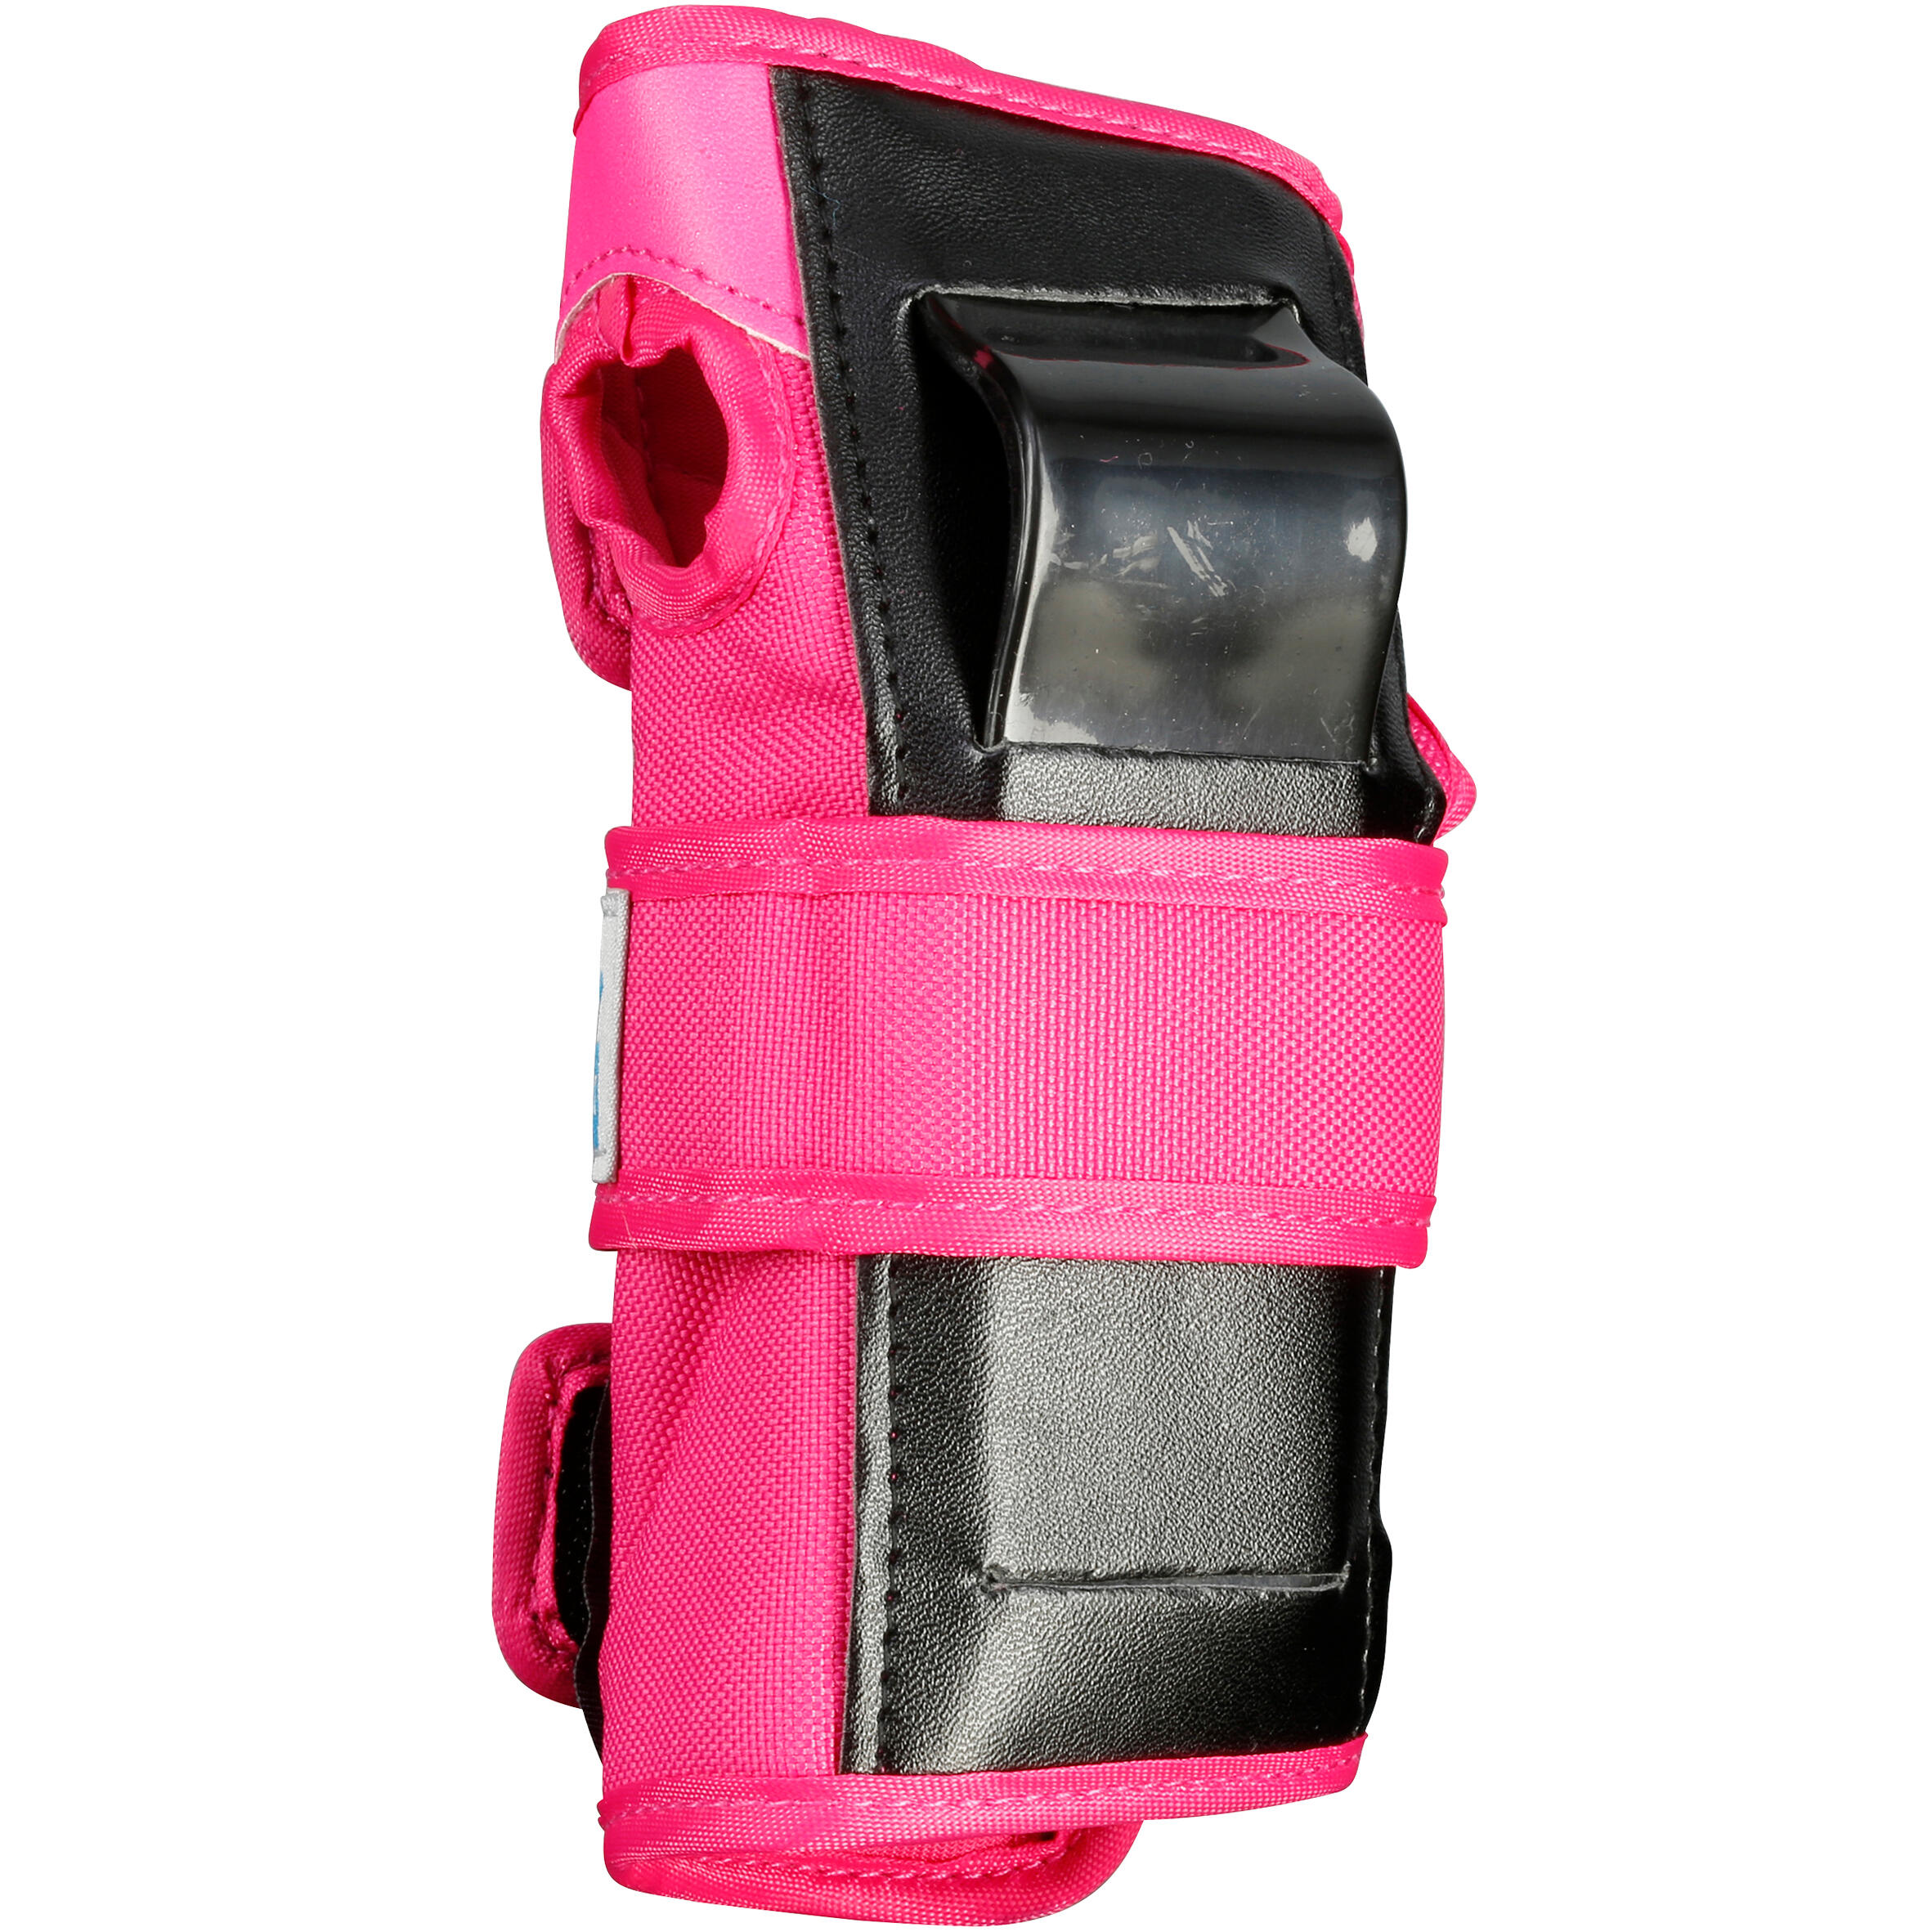 Kids' 2 x 3-Piece Skating Skateboard Scooter Protective Gear Basic - Pink 2/7